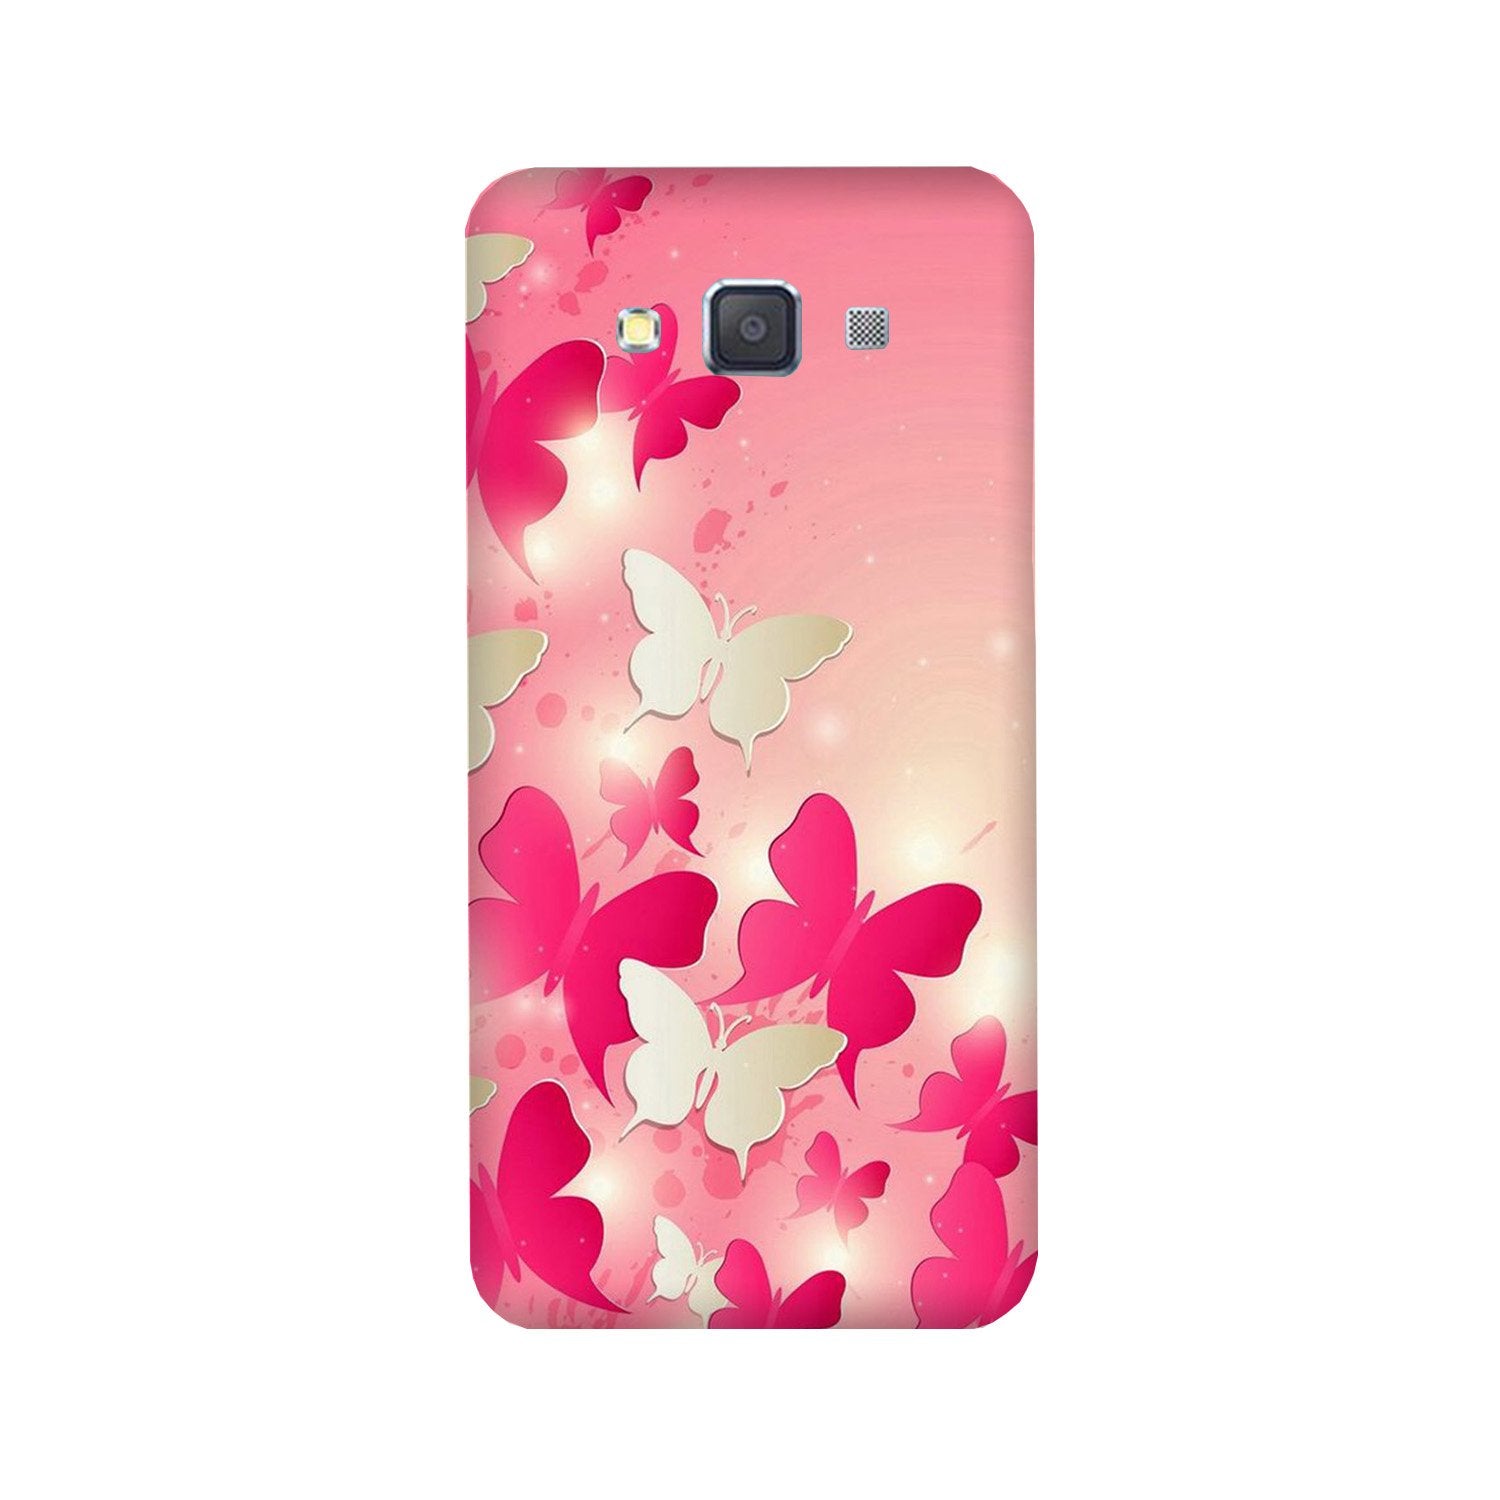 White Pick Butterflies Case for Galaxy Grand Max